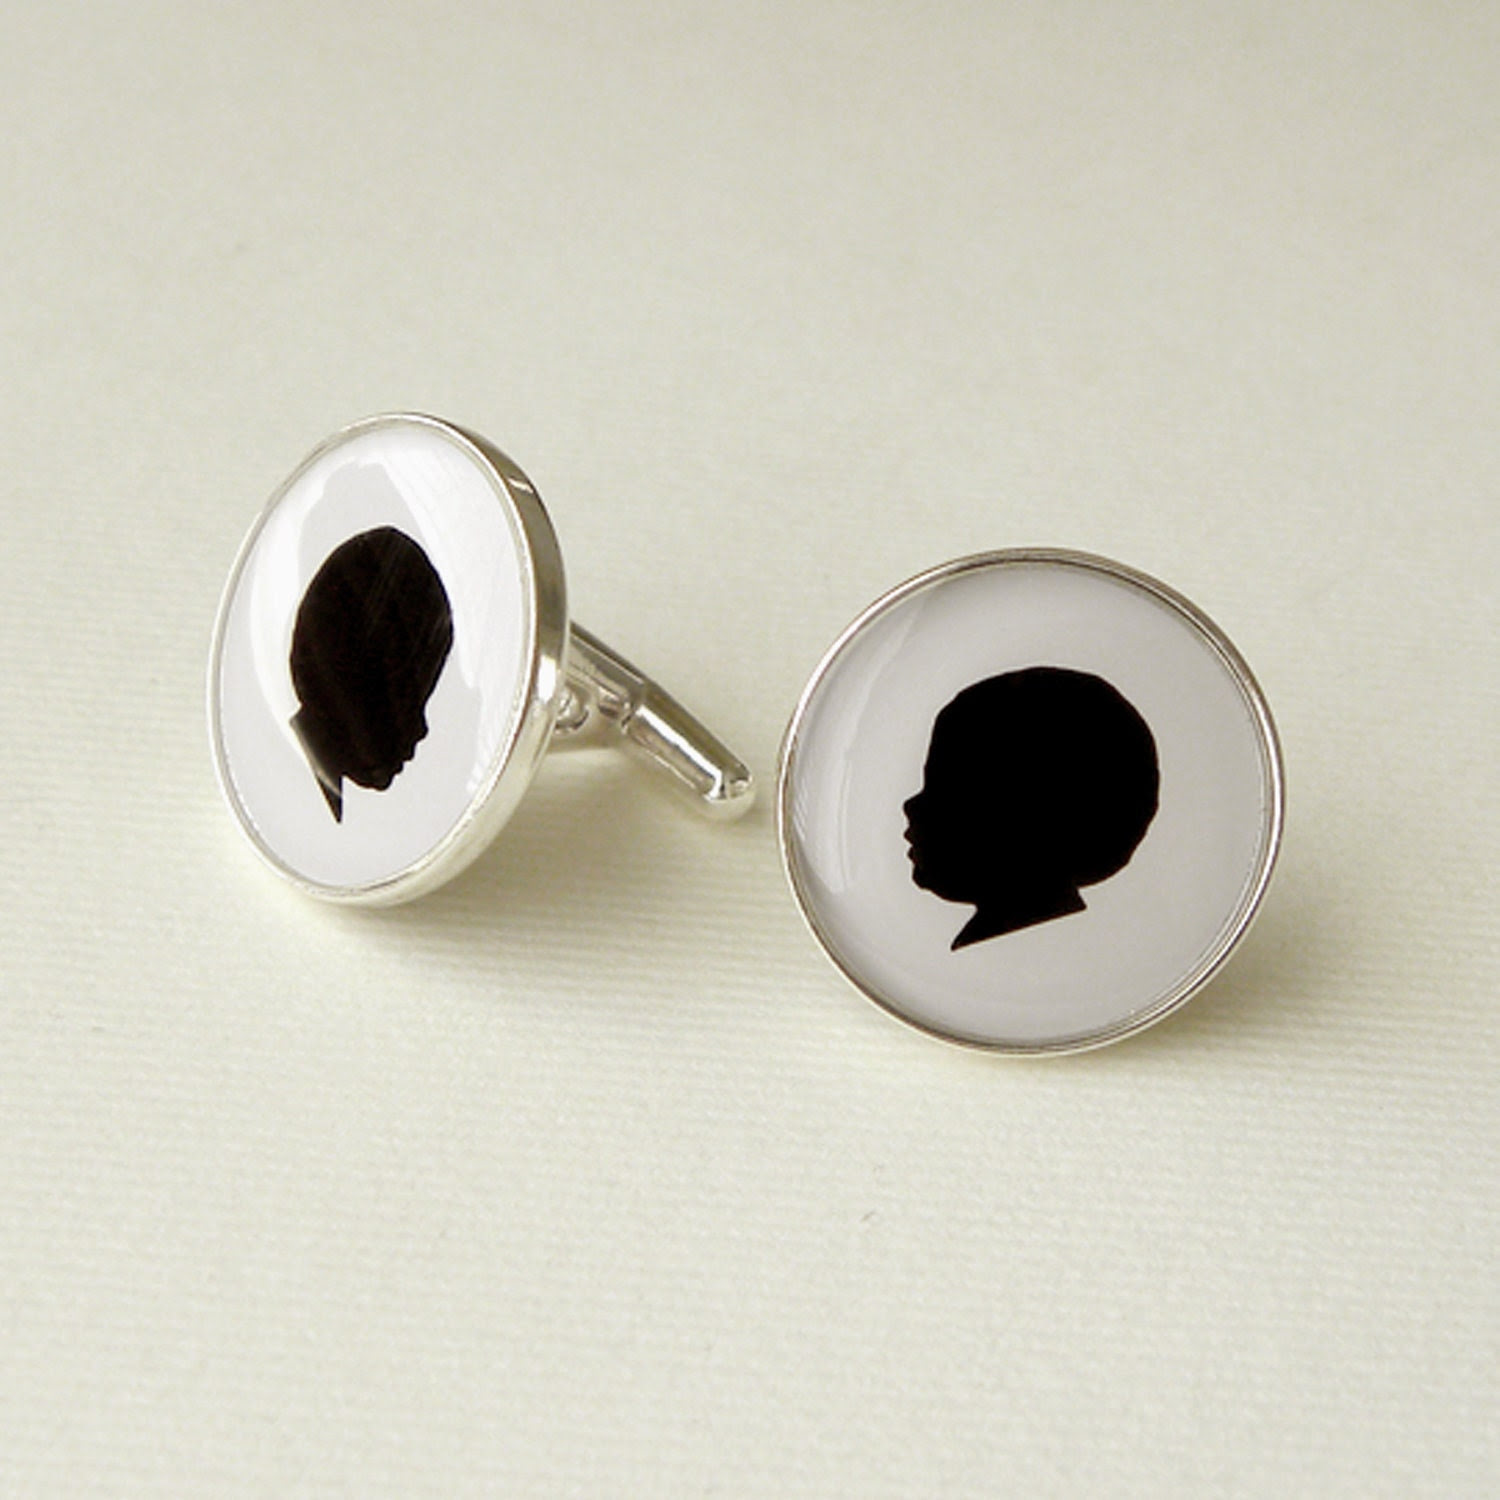 Custom Cuff Links for Father's Day in Sterling Silver with your Child's Silhouette for Father or Grandfather